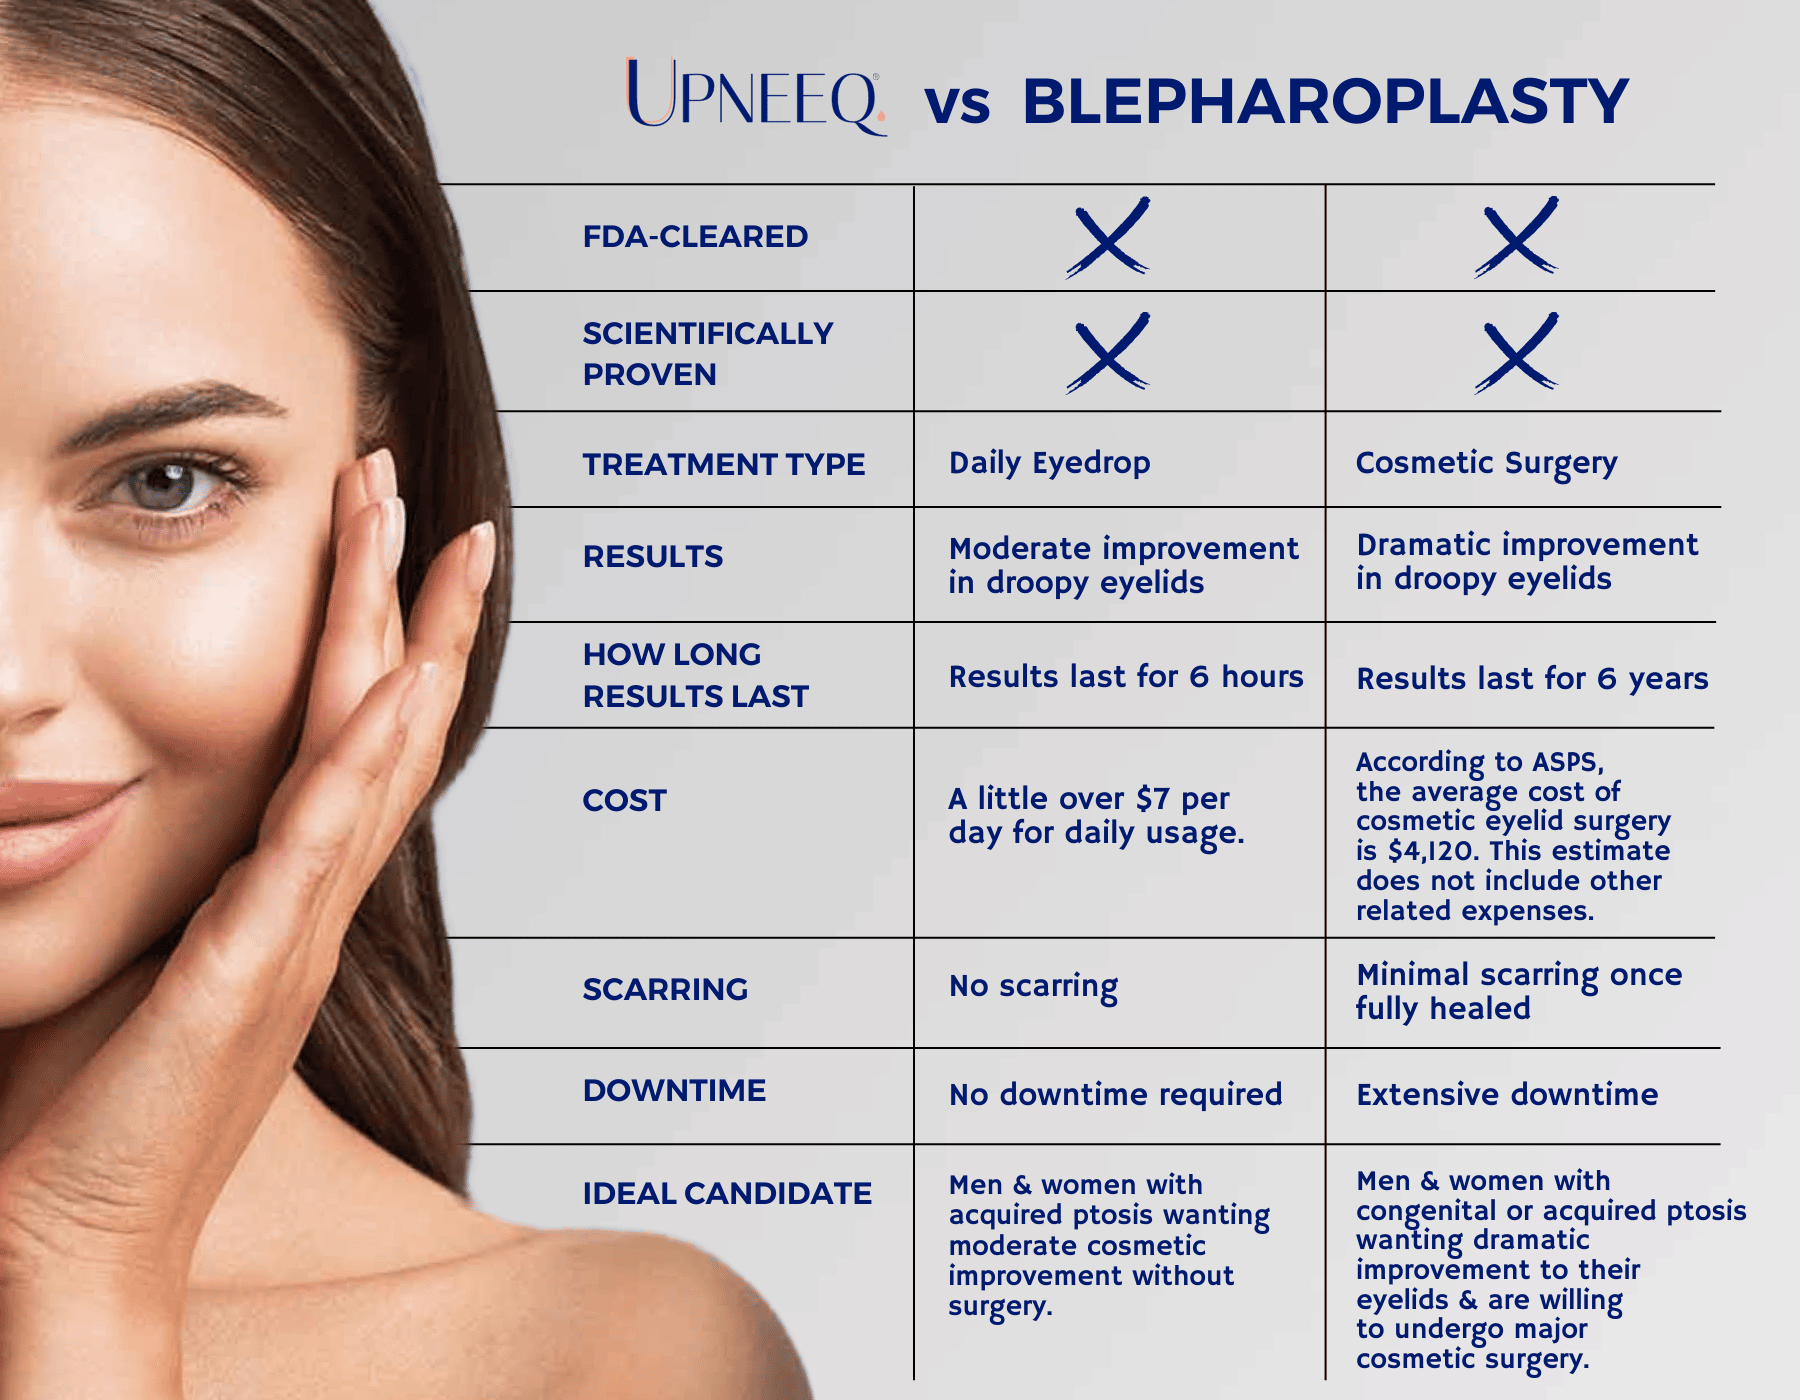 Upneeq vs Blepharoplasty side by side comparison graphic.